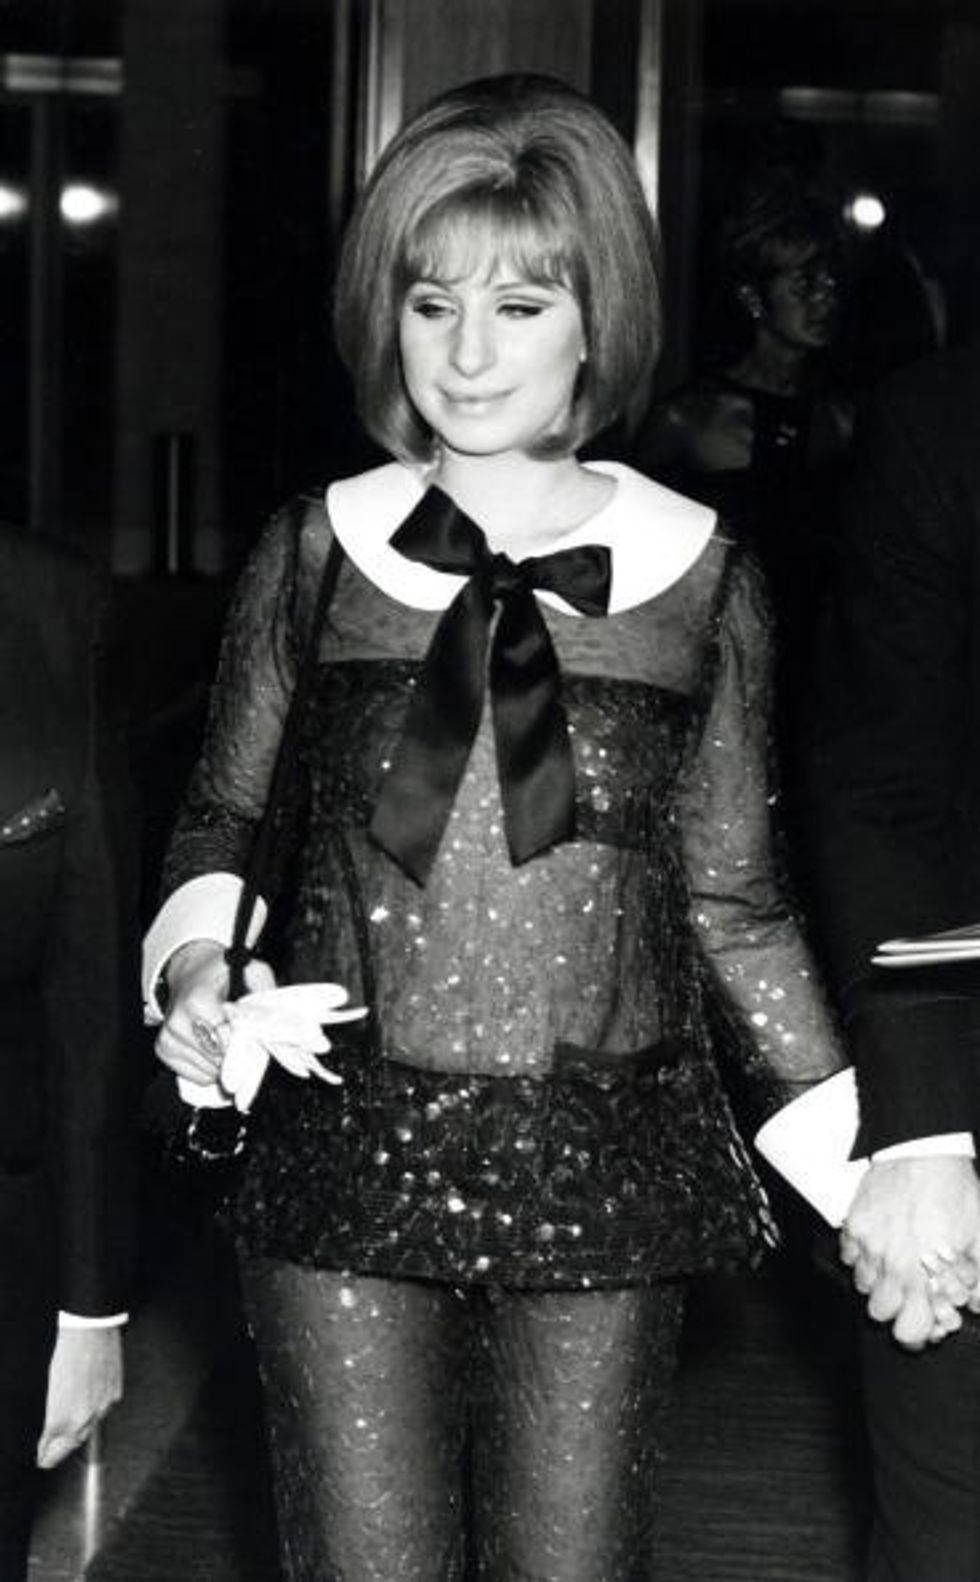 Barbra Streisand in Arnold Scaasi at the 41st Academy Awards (1969)